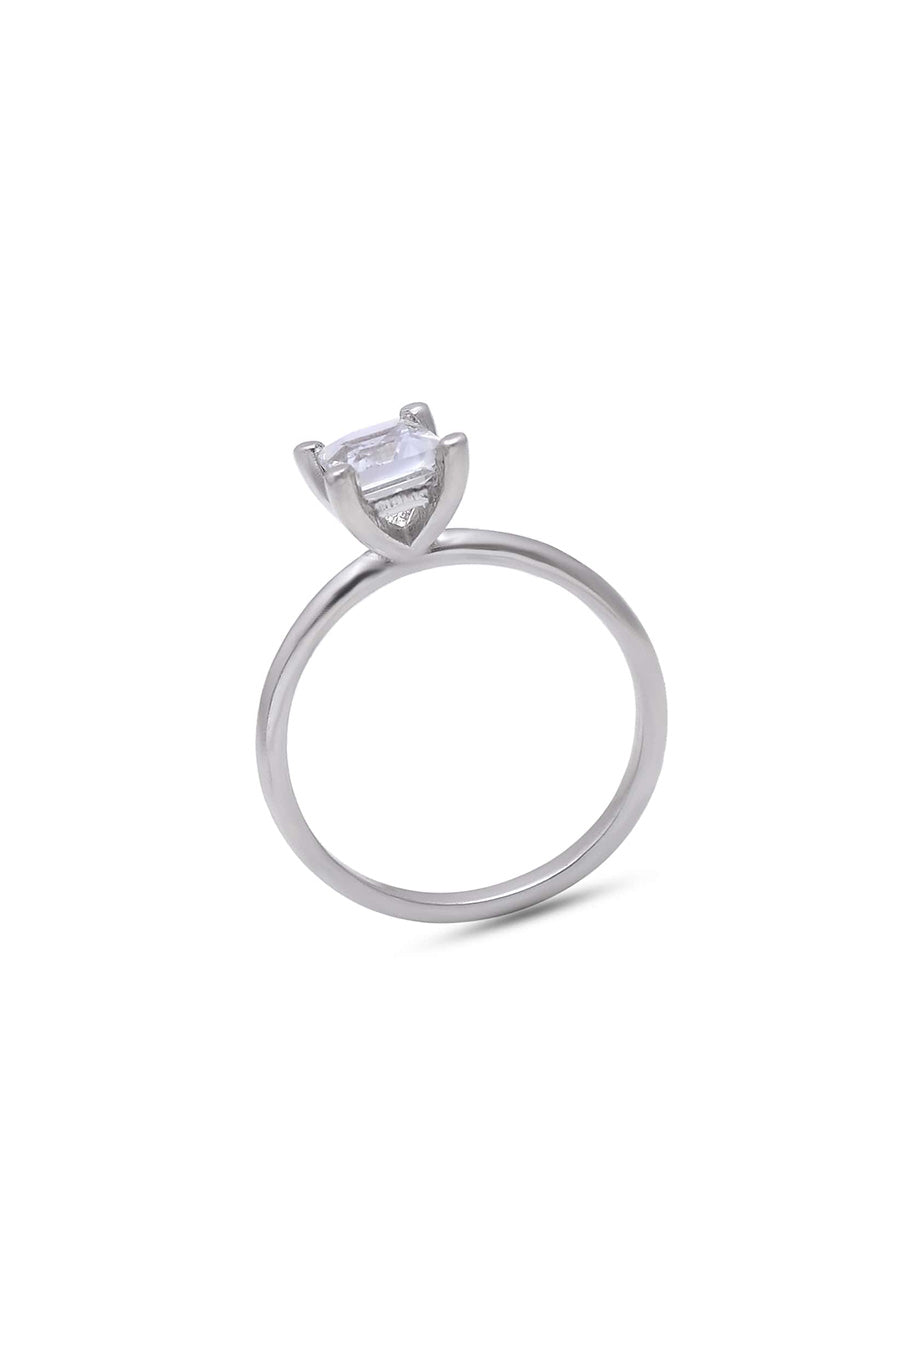 White Topaz Octagon Solitaire Ring in 925 Silver